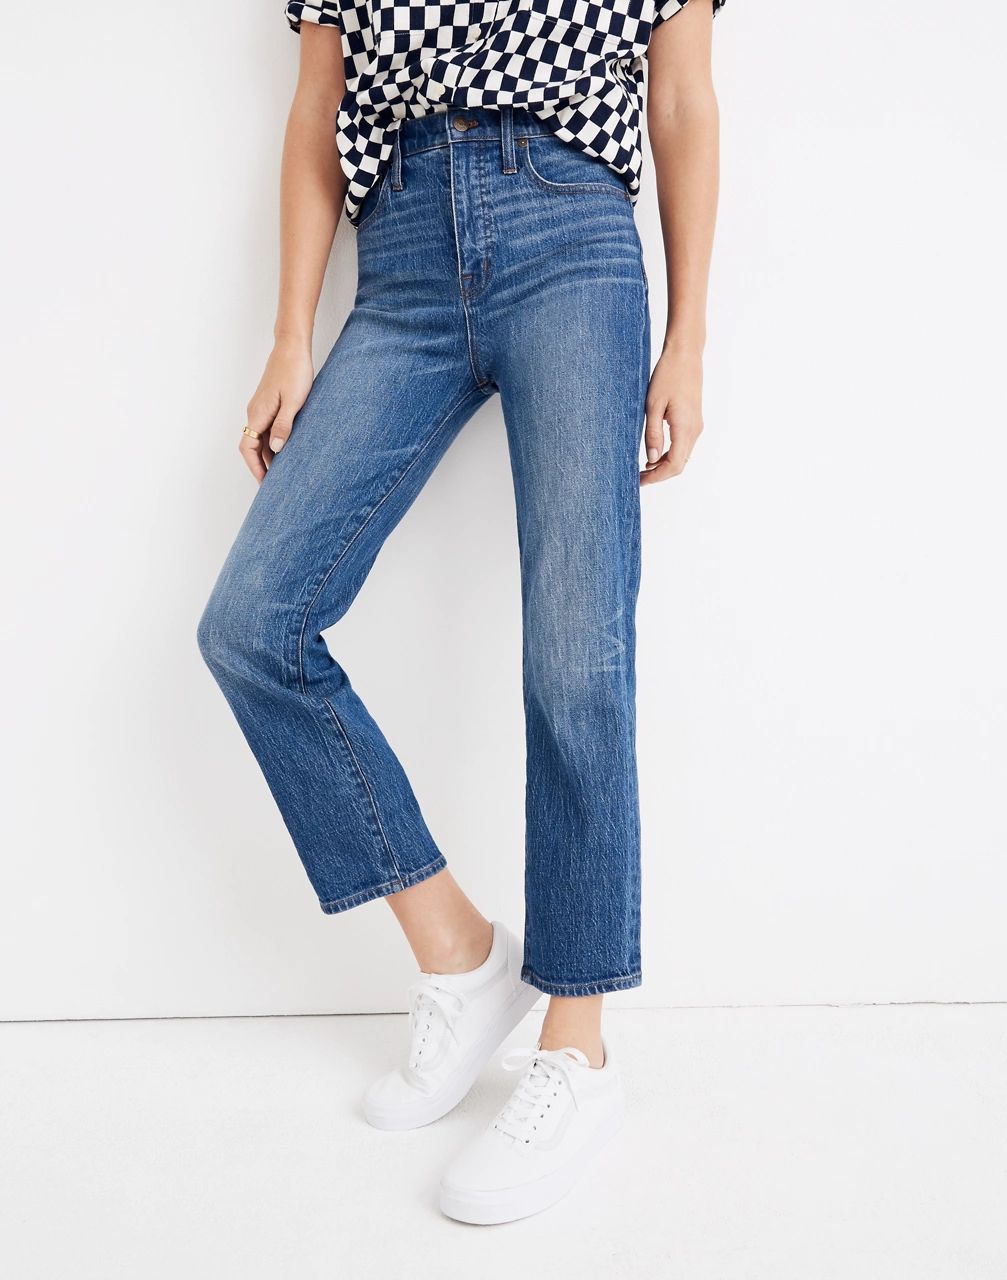 Classic Straight Jeans in Fawn Wash | Madewell